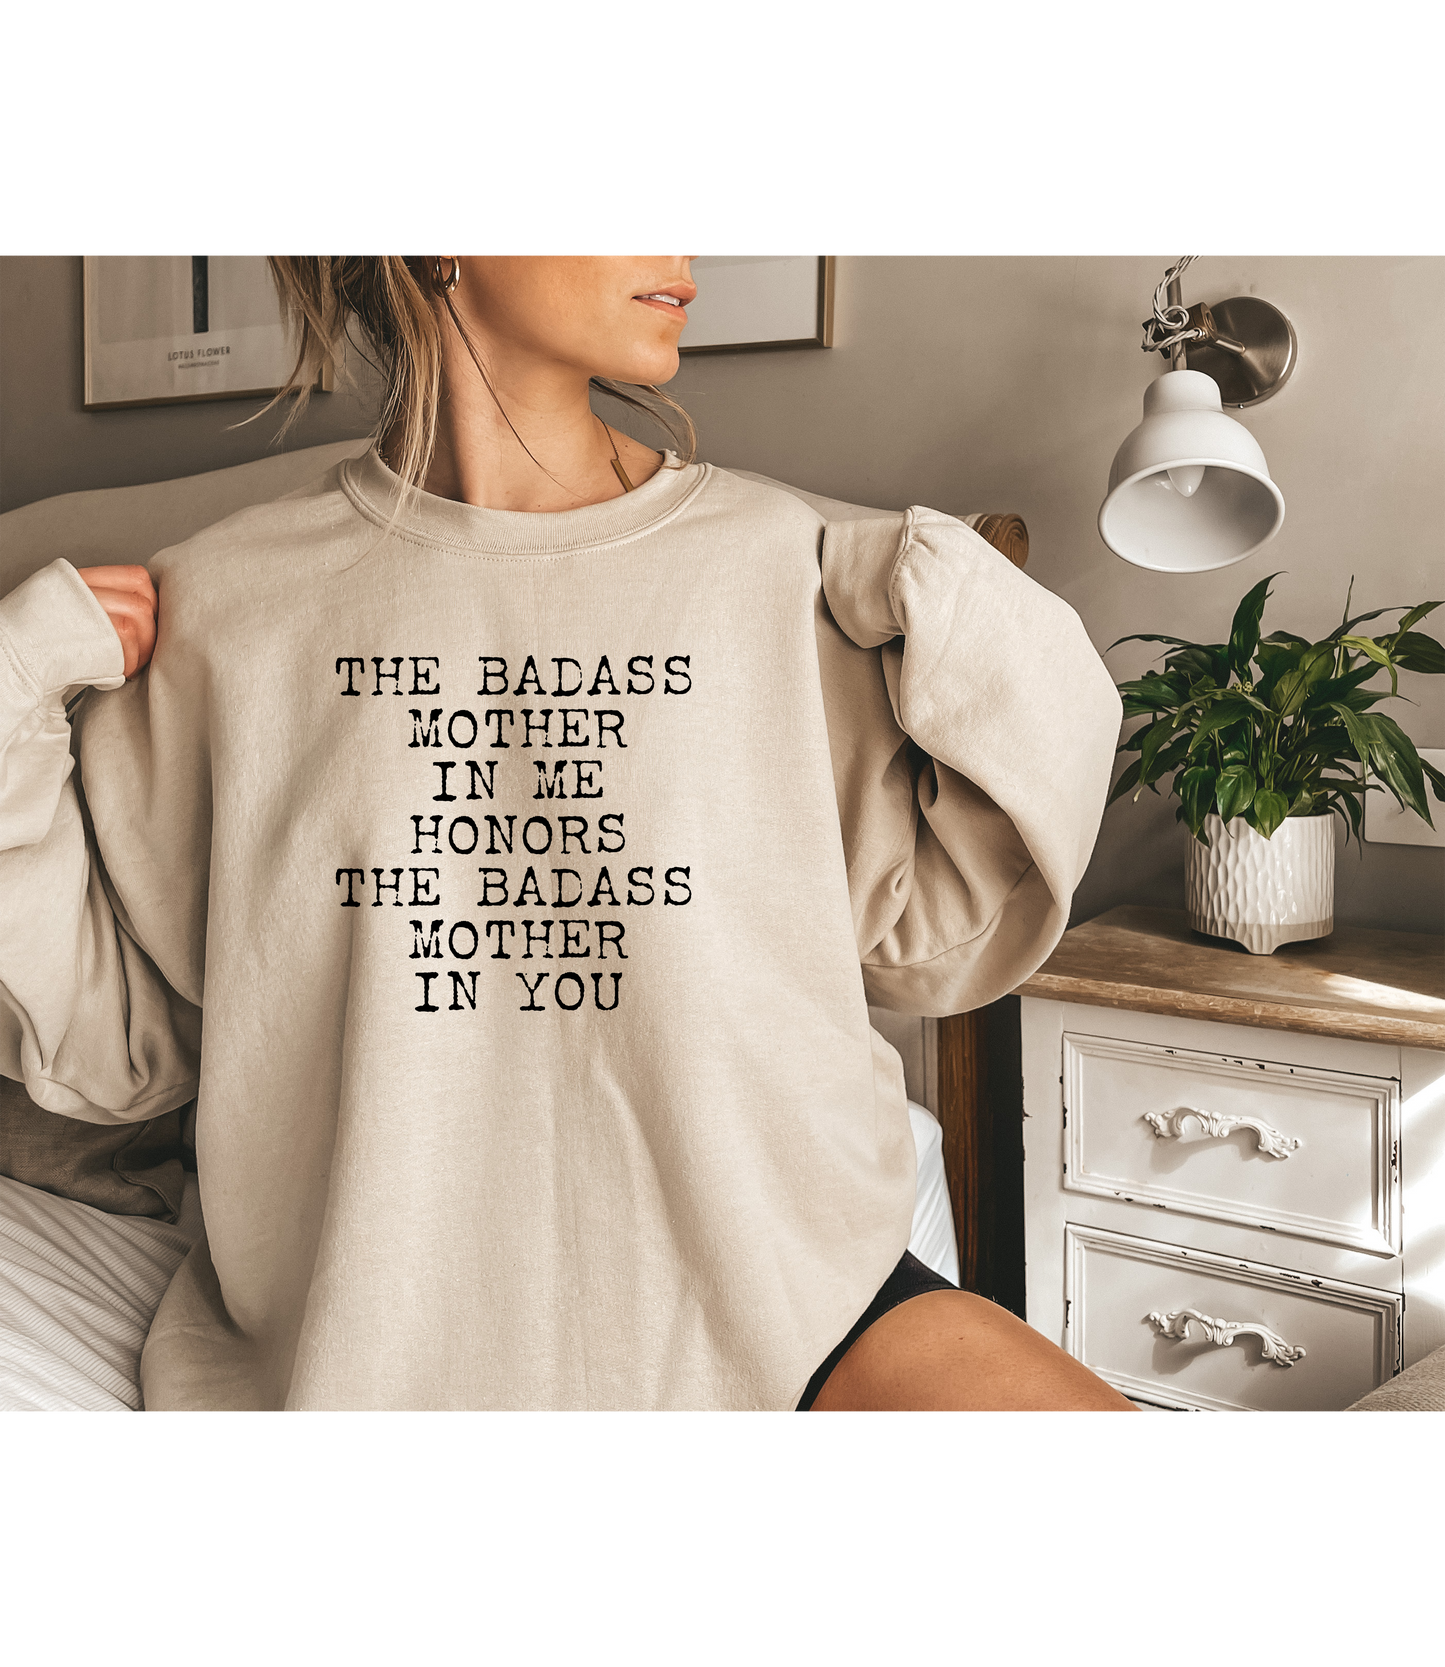 The Badass MOTHER In Me Honors The Badass MOTHER In You - Sweatshirts